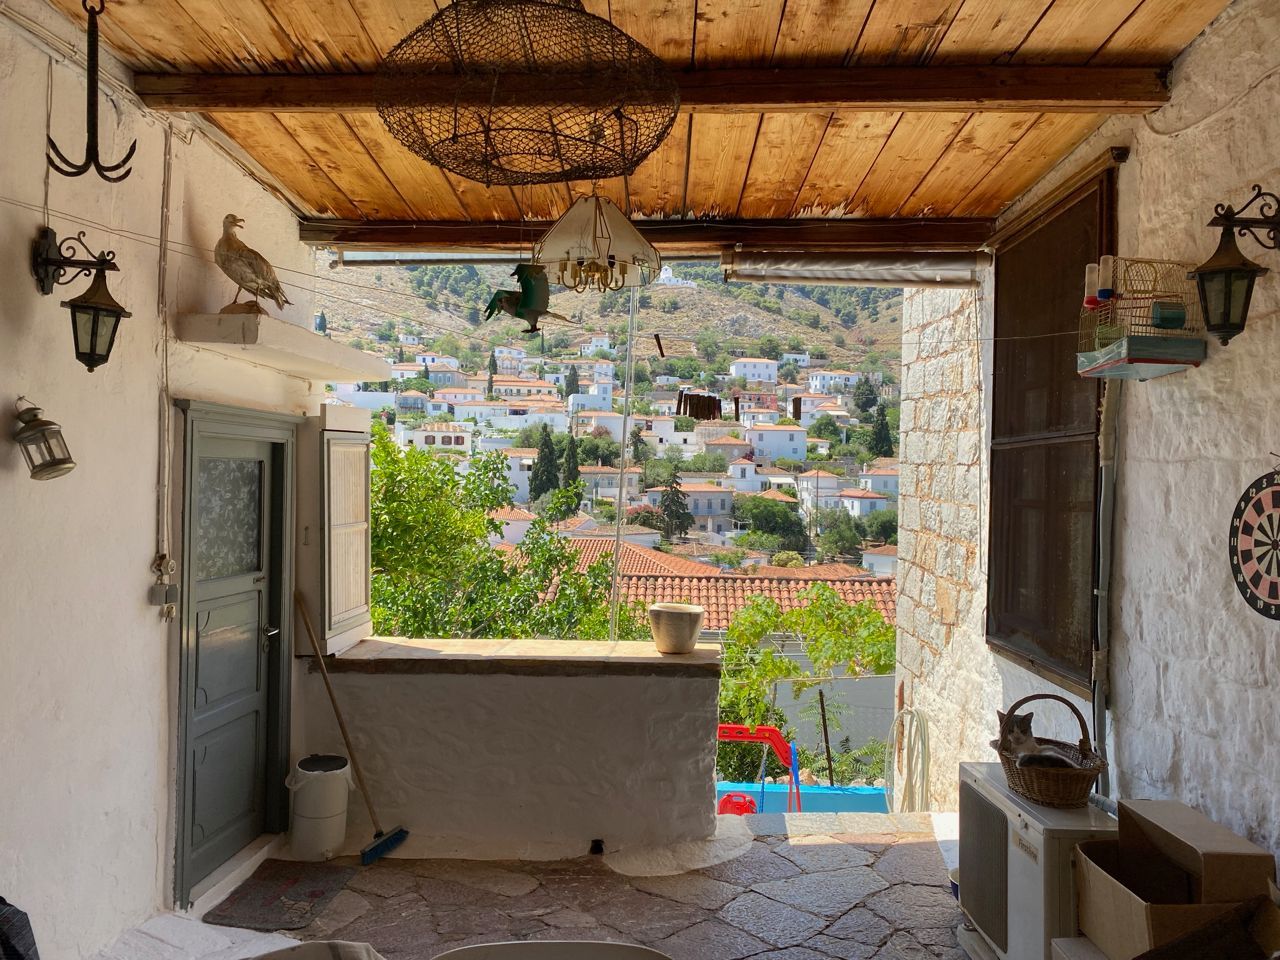 Property for sale on Hydra Island Greece - Hydra real estate with real estate agent Kelsey Edwards.